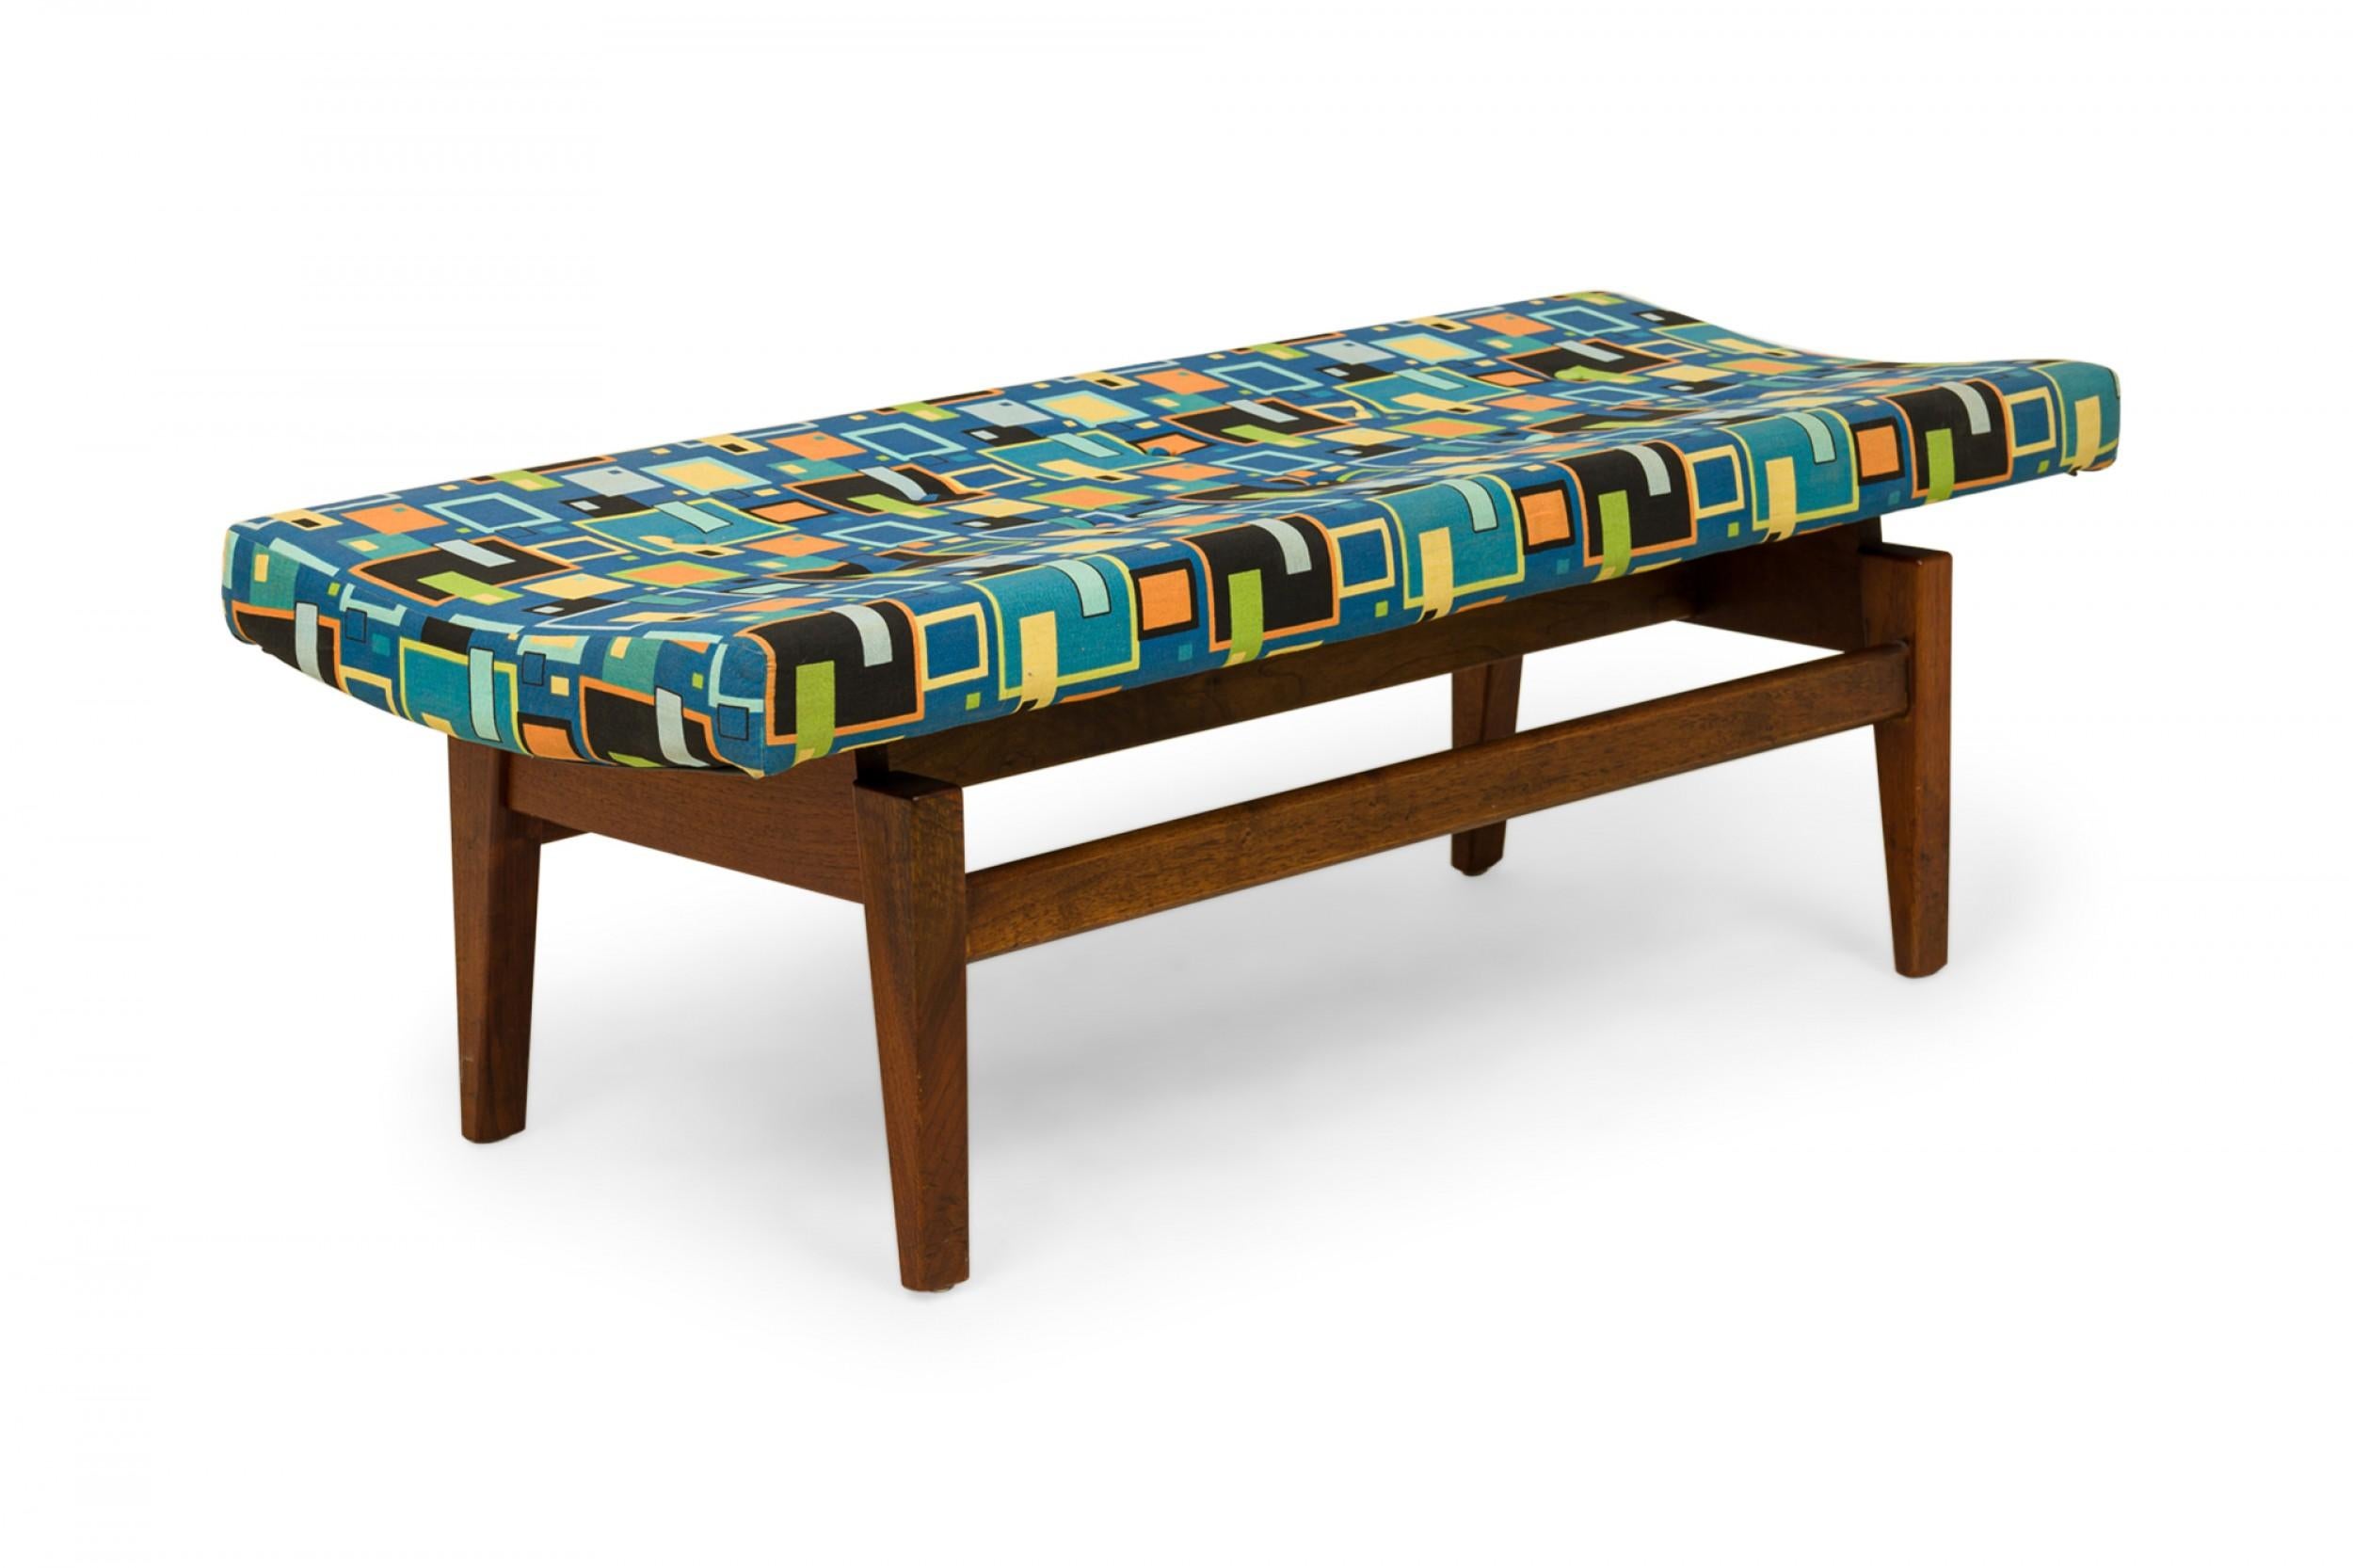 Danish Jens Risom Multi-Colored Geometric Pattern Upholstery and Wood Floating Bench For Sale